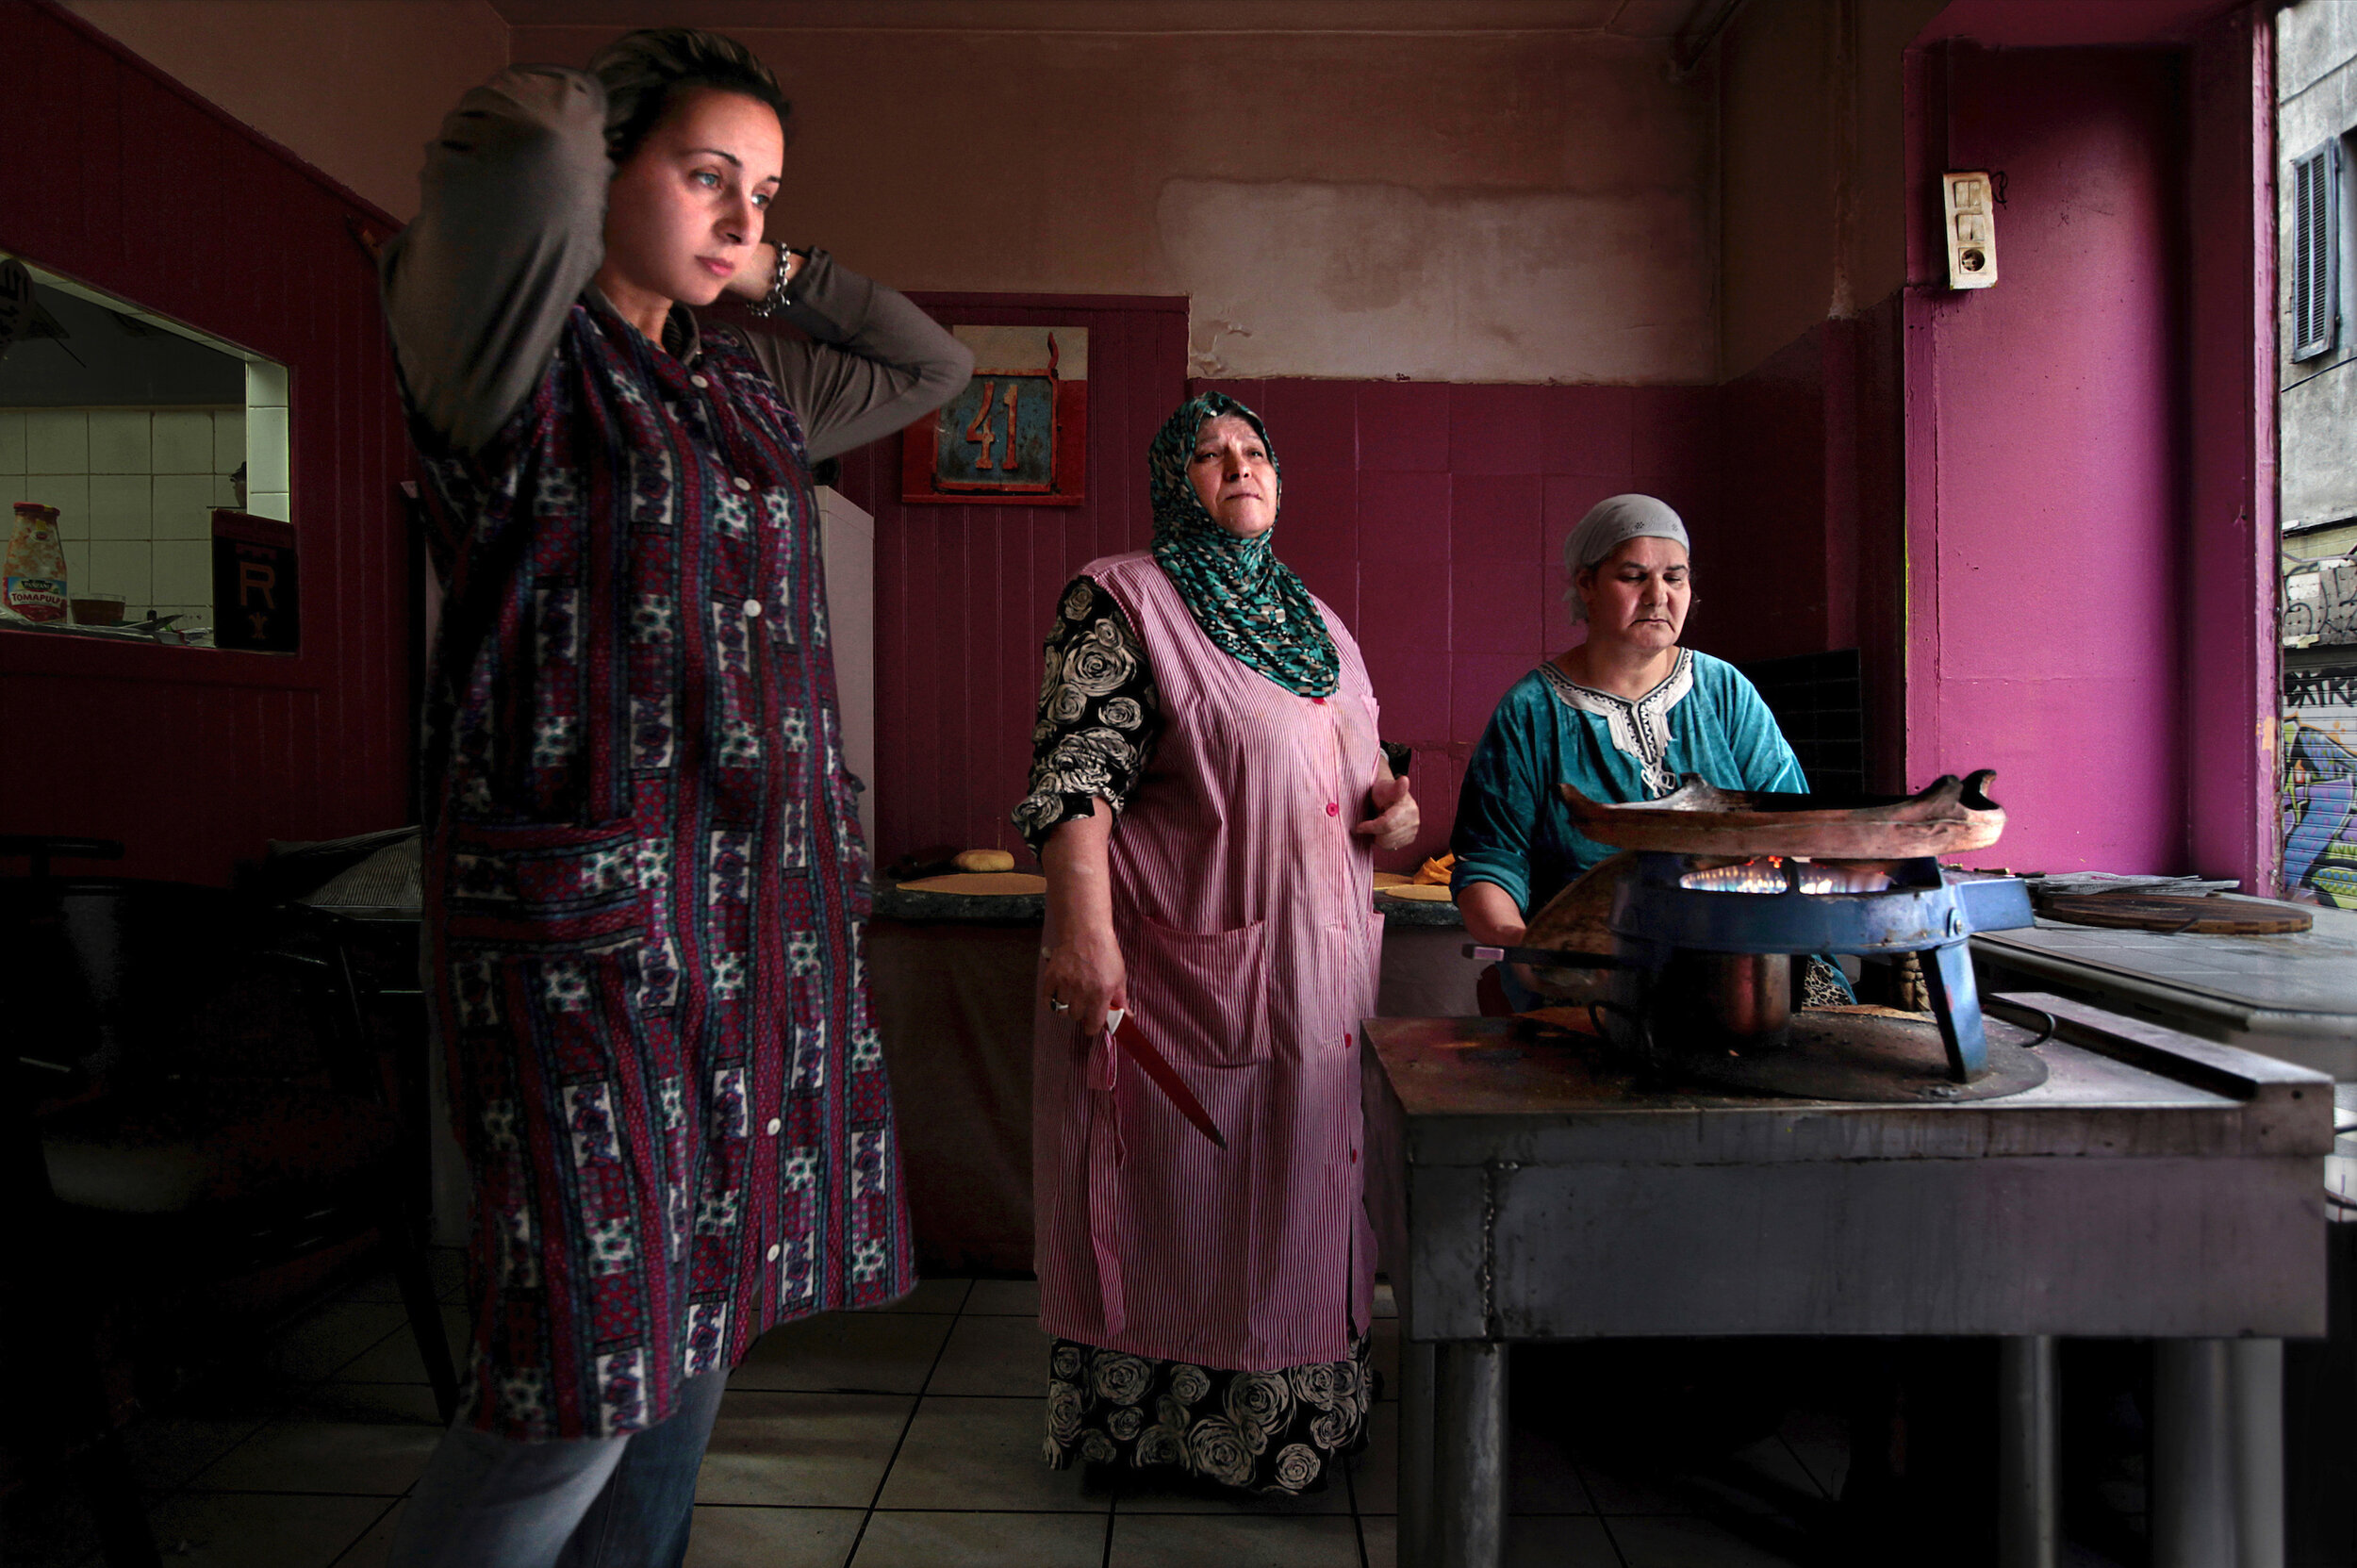   France. Marseille. 2014. Women prepare the traditional Algerian flatbread, Kesra, inside a shop at Noailles. Noailles is a neighborhood in the 1st arrondissement of Marseille located downtown near the Old Port. Noailles is famous for its old buildi